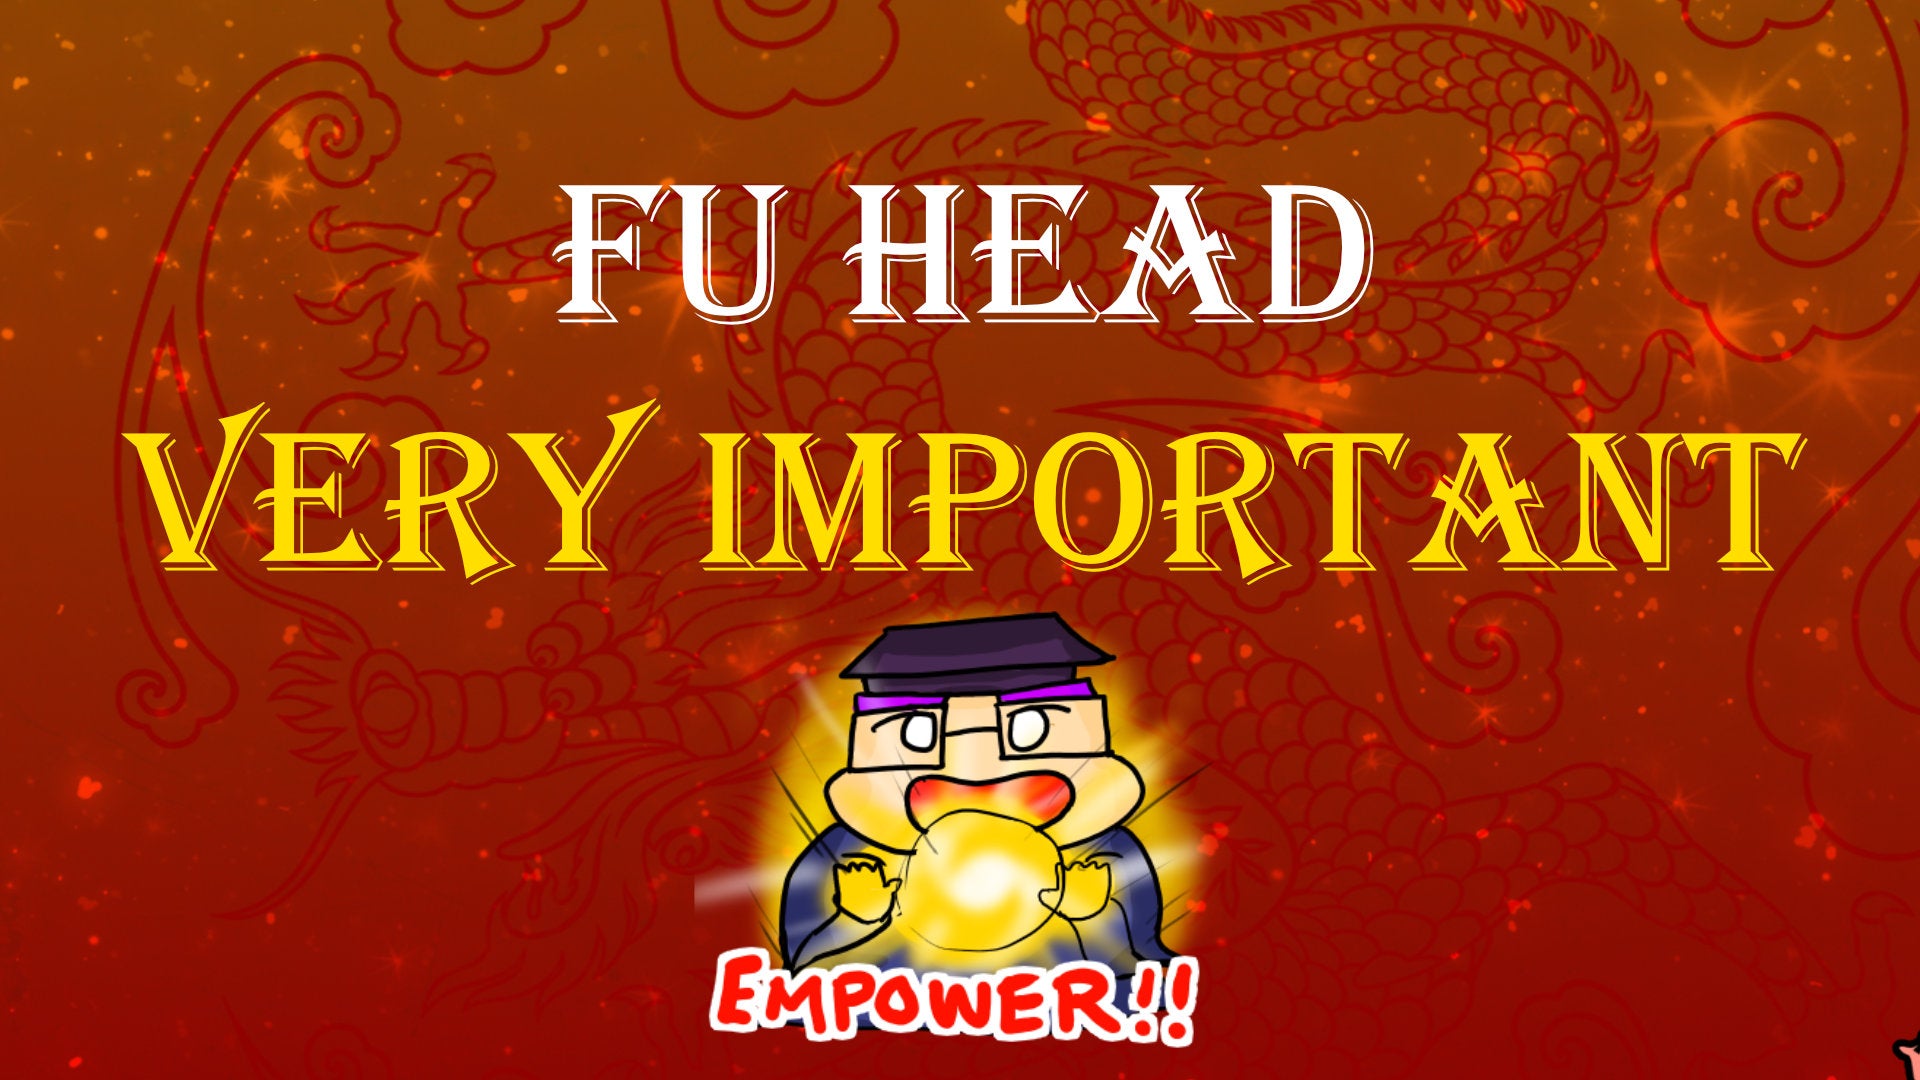 
                  FU HEAD is Very Important
                